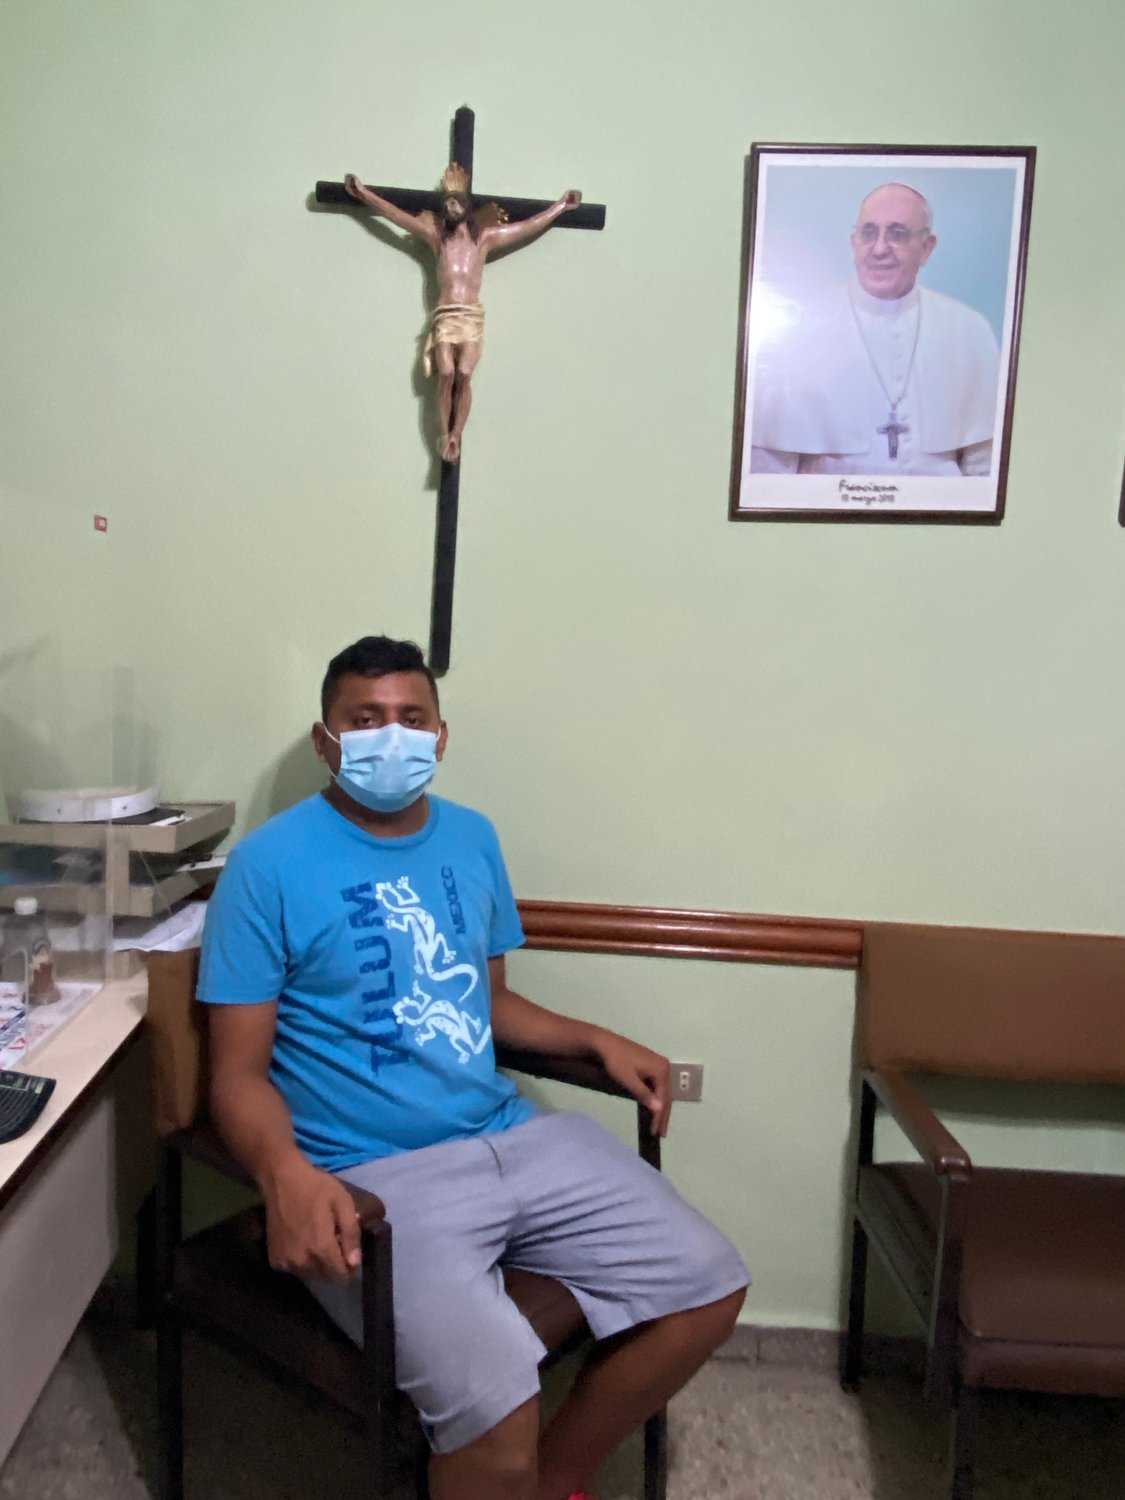 Jose Andres Martinez sits for an interview Aug. 17, 2021, at Our Lady of Mount Carmel Church in San Salvador, El Salvador. Martinez, a former sacristan, recently returned to his native El Salvador after six attempts to cross the U.S.-Mexico border. (CNS photo/Rhina Guidos)